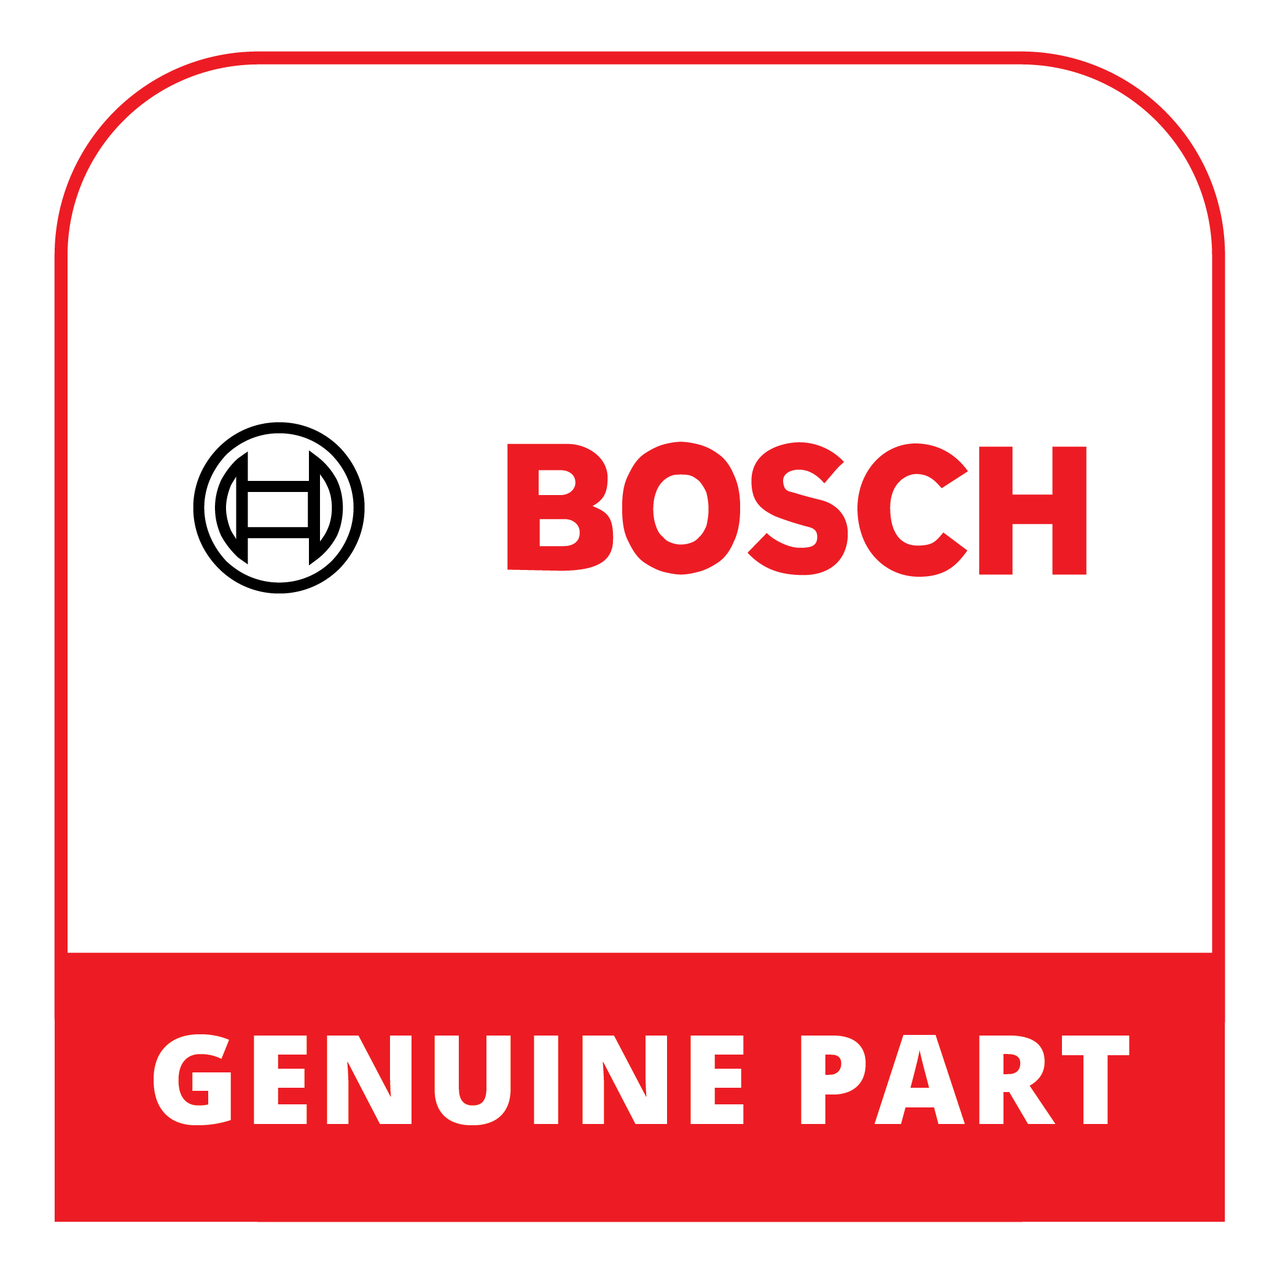 Bosch (Thermador) 10009603 - Mounting Set - Genuine Bosch (Thermador) Part